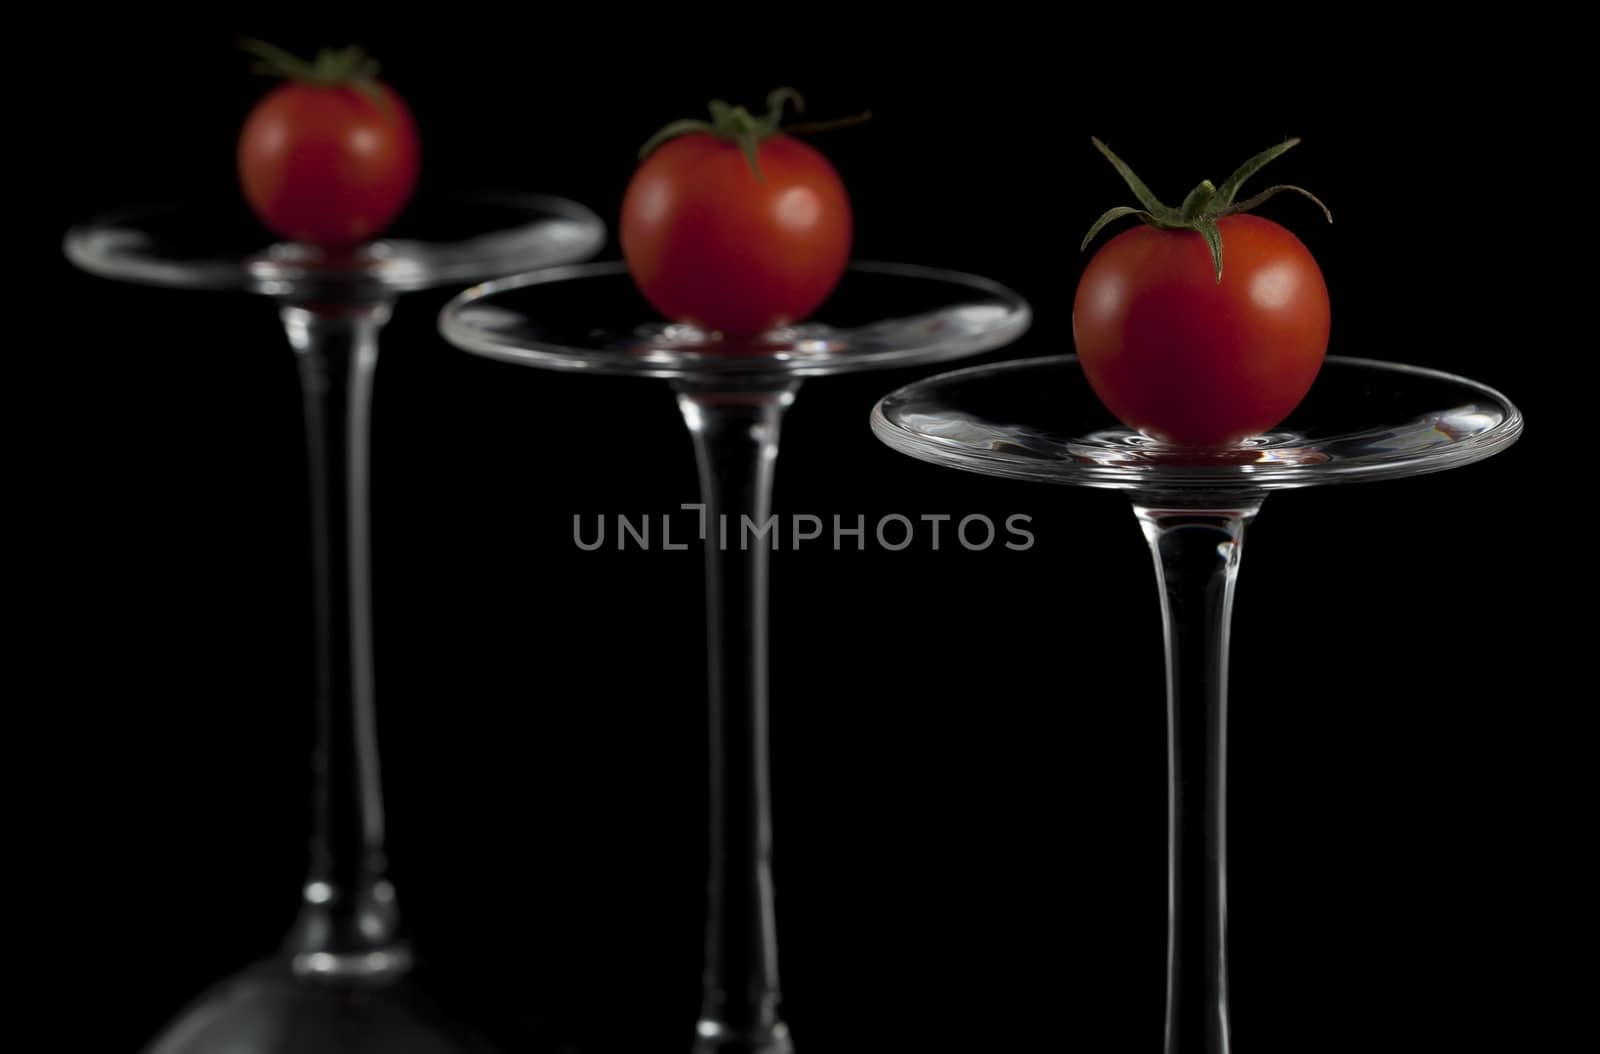 Red cherry tomatoes. by sergey_pankin